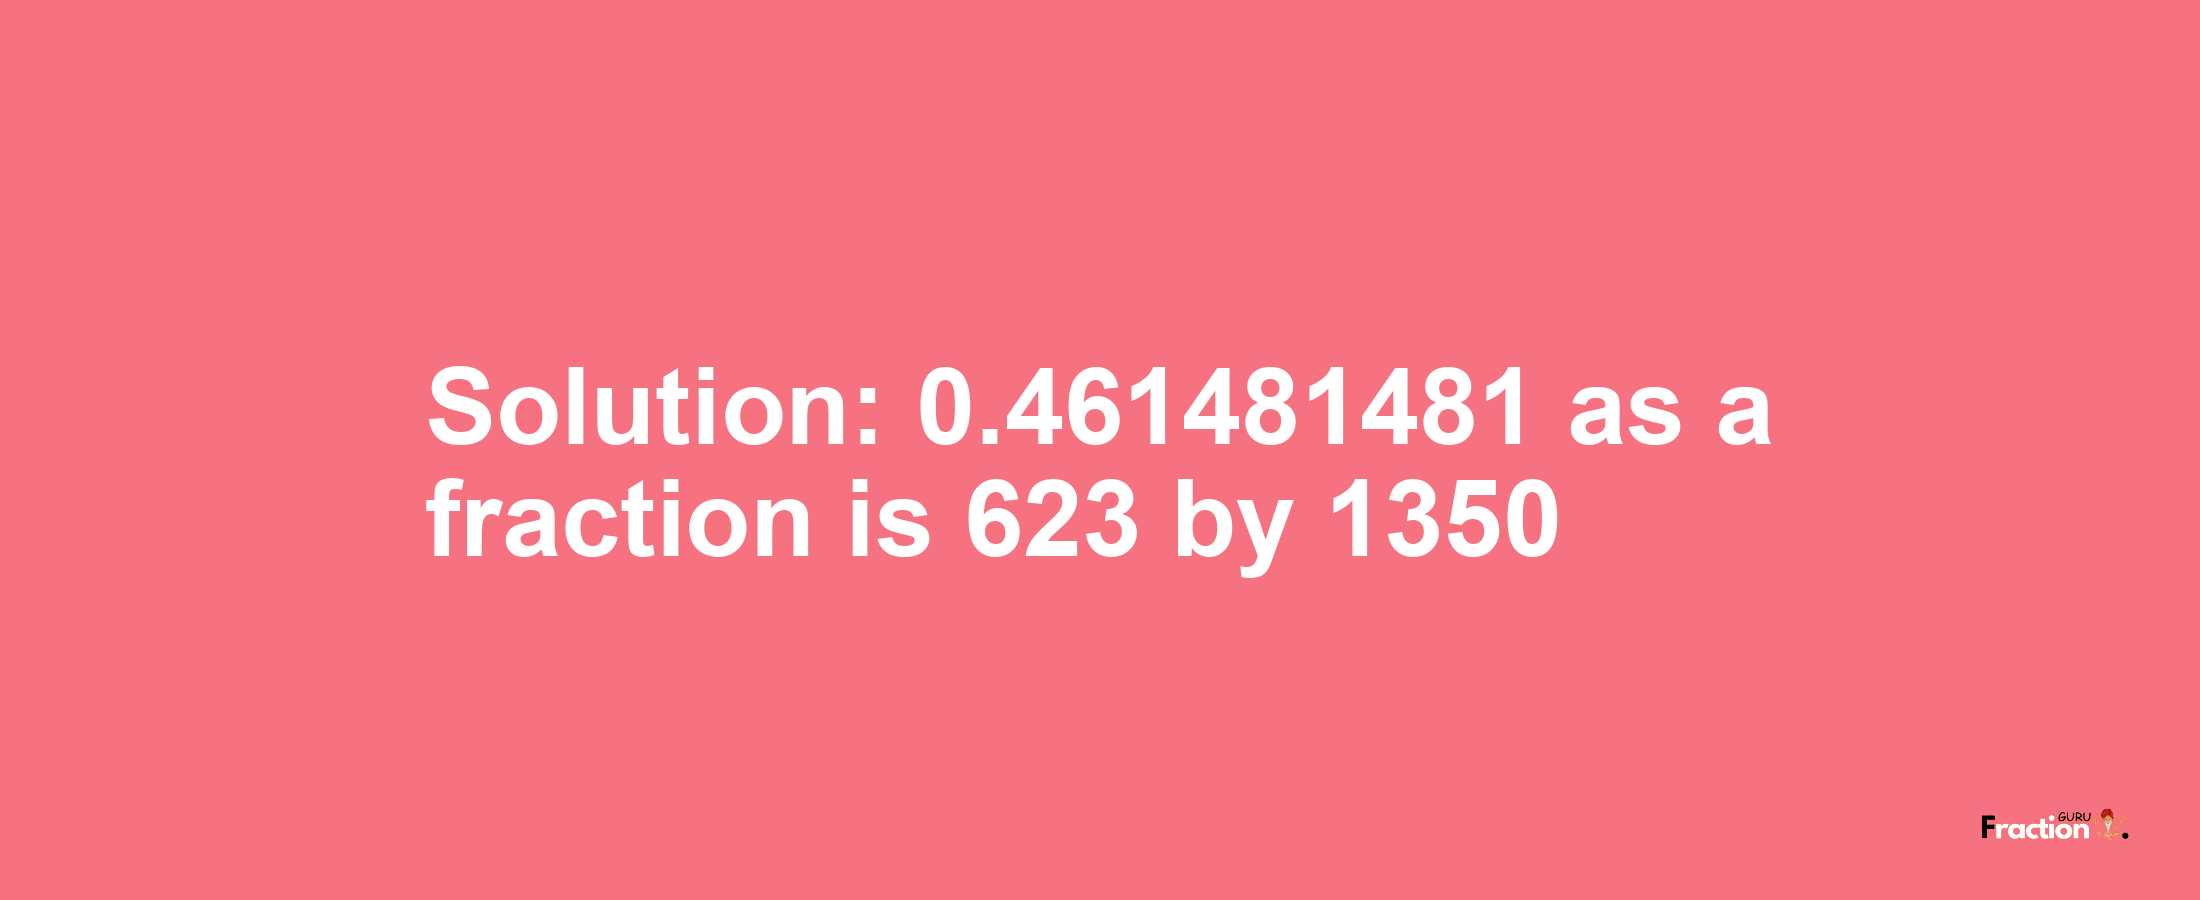 Solution:0.461481481 as a fraction is 623/1350